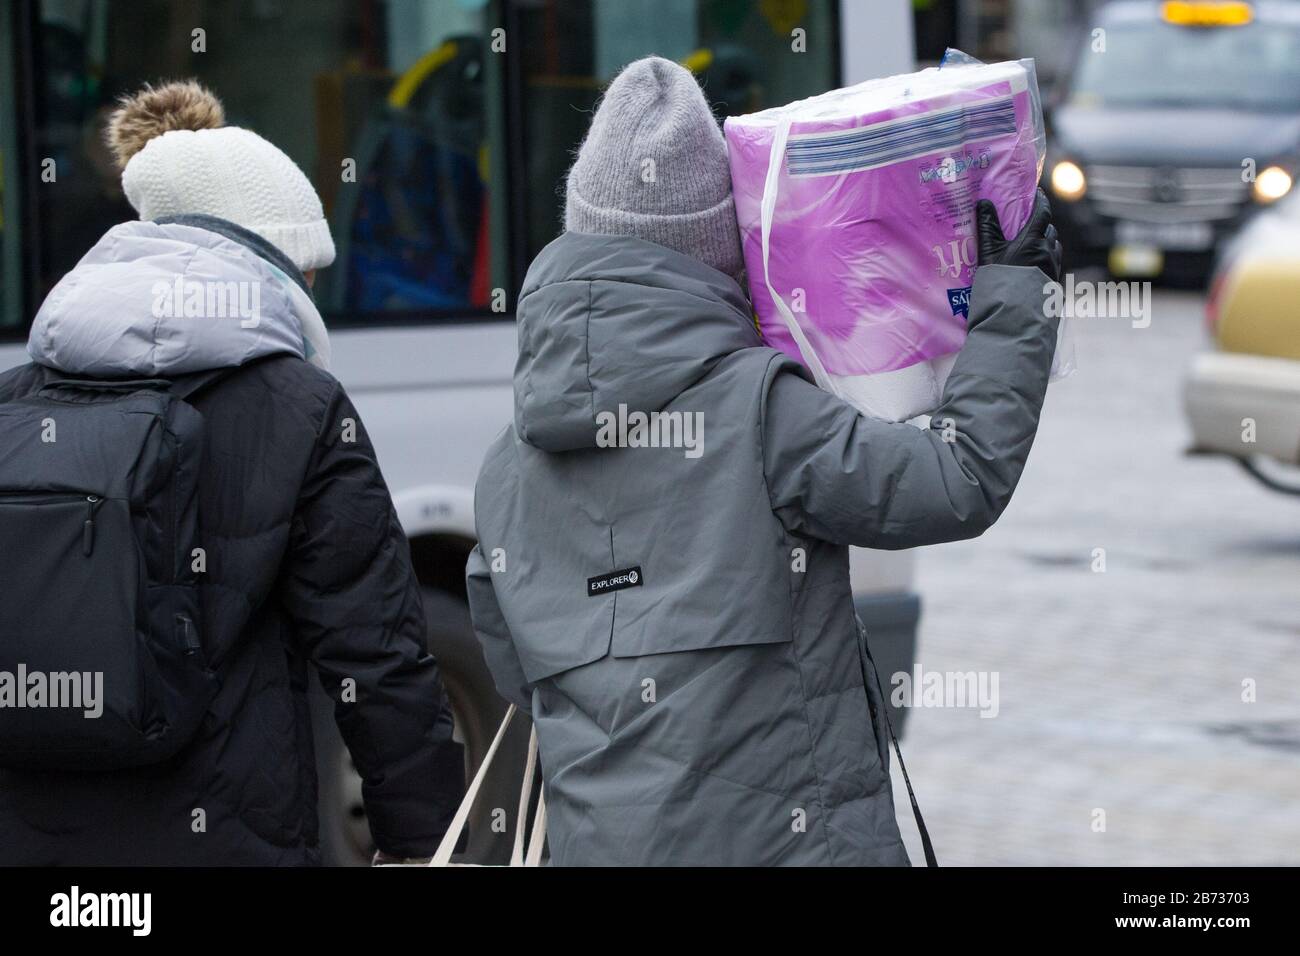 Edinburgh, UK. 13th Mar, 2020. Pictured: People seen on the Royal Mile in Edinburgh with bumper pack of toilet paper, due to panic buying as the shops are now rationing the supply and purchase of toilet paper and every day consumables due to the cause of Coronavirus. Credit: Colin Fisher/Alamy Live News Stock Photo